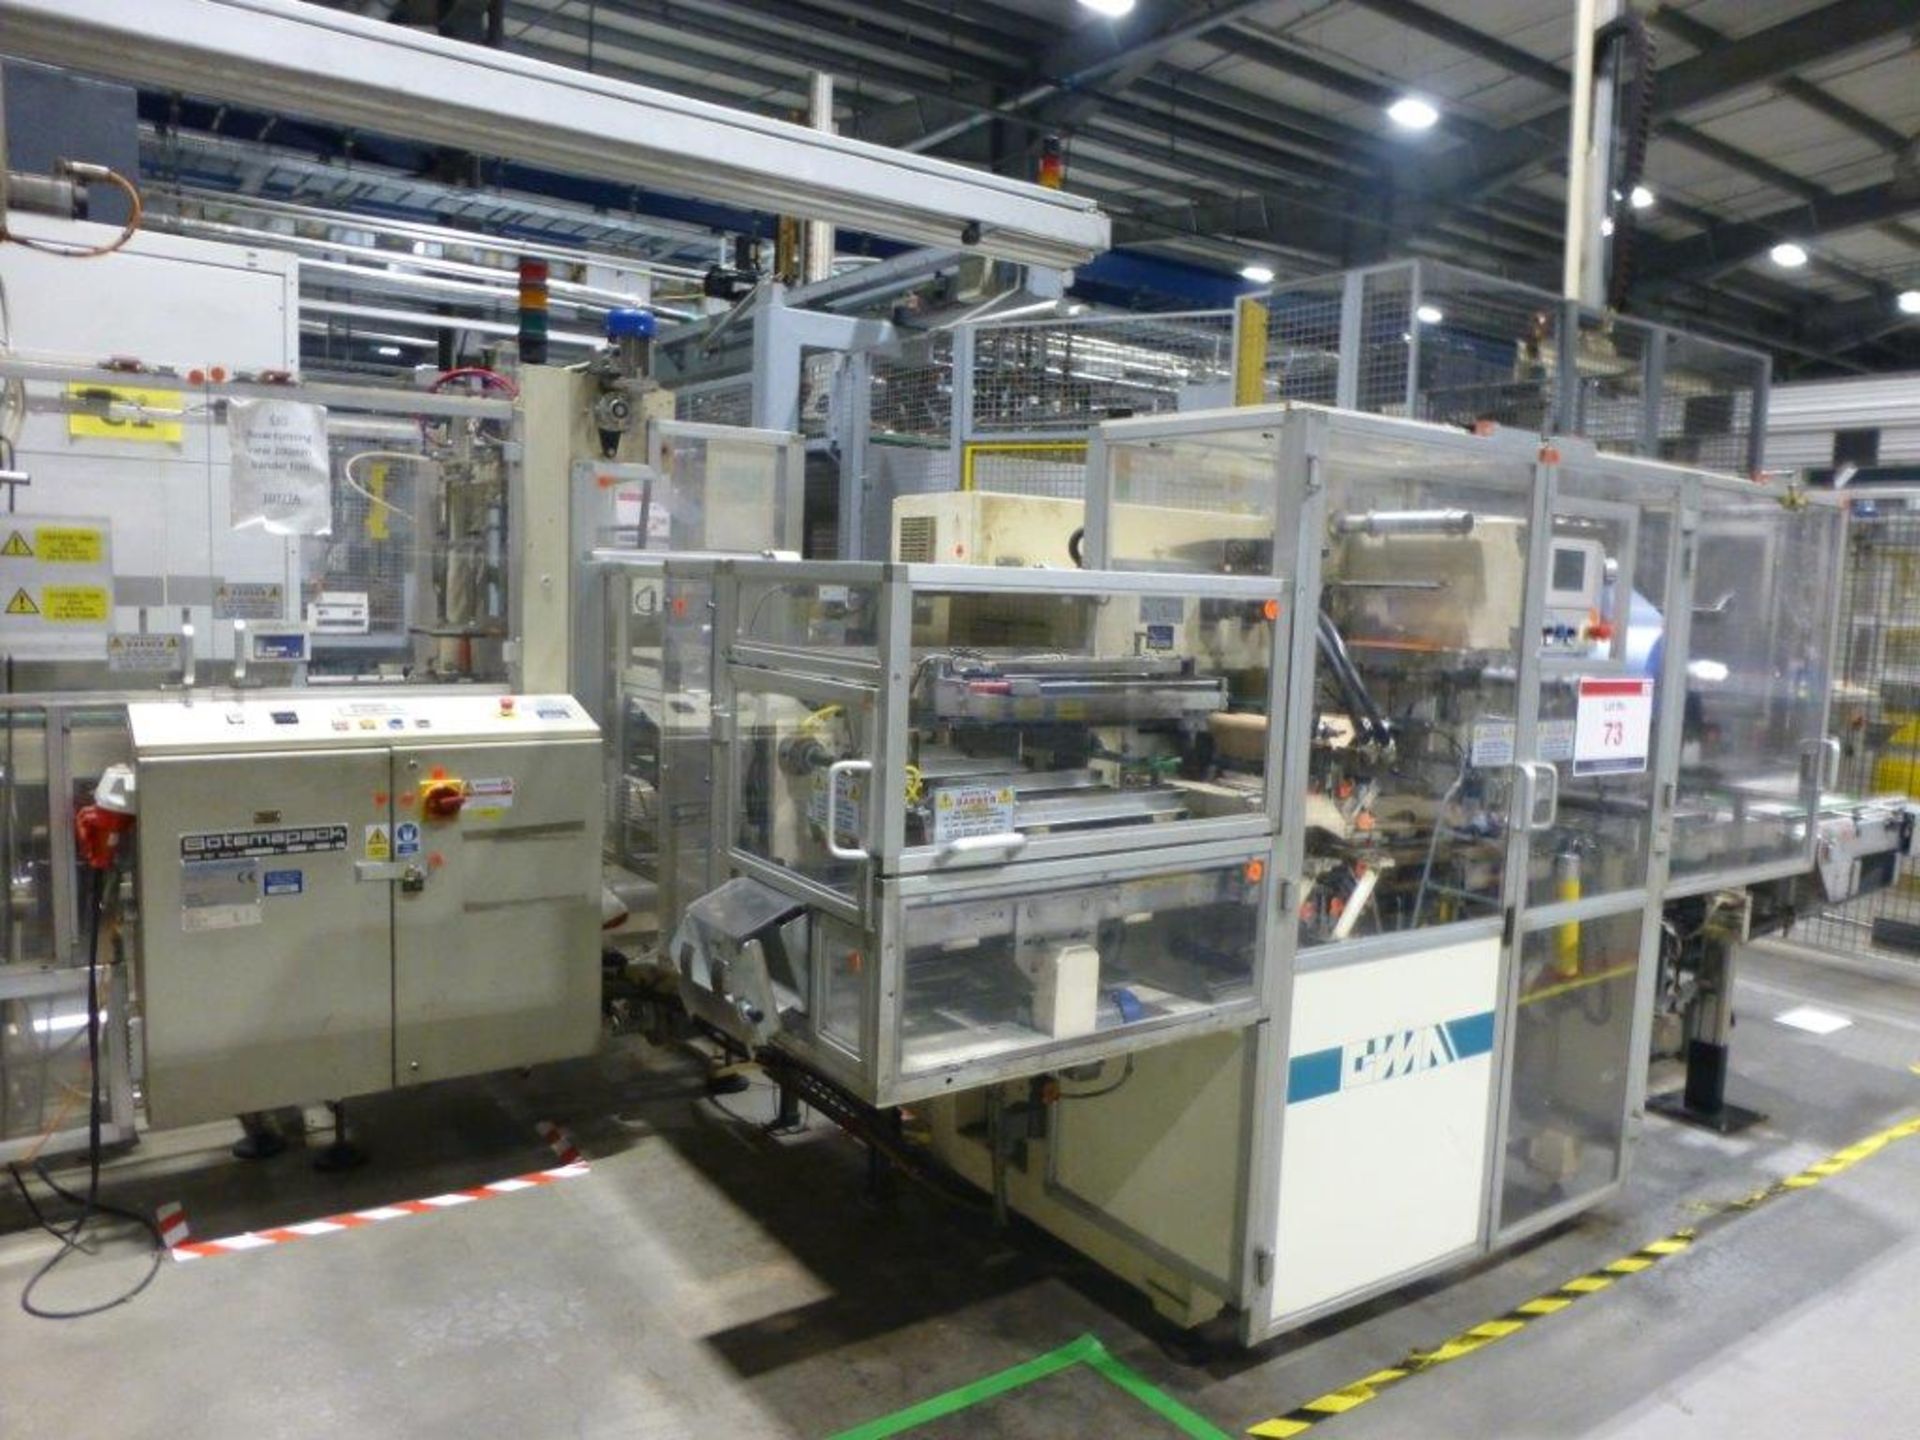 GIMA Type 884 DVD CNC Rotary Thermal Welding Machine Serial No. 88442CO (2002) with flip unit and - Bild 2 aus 4